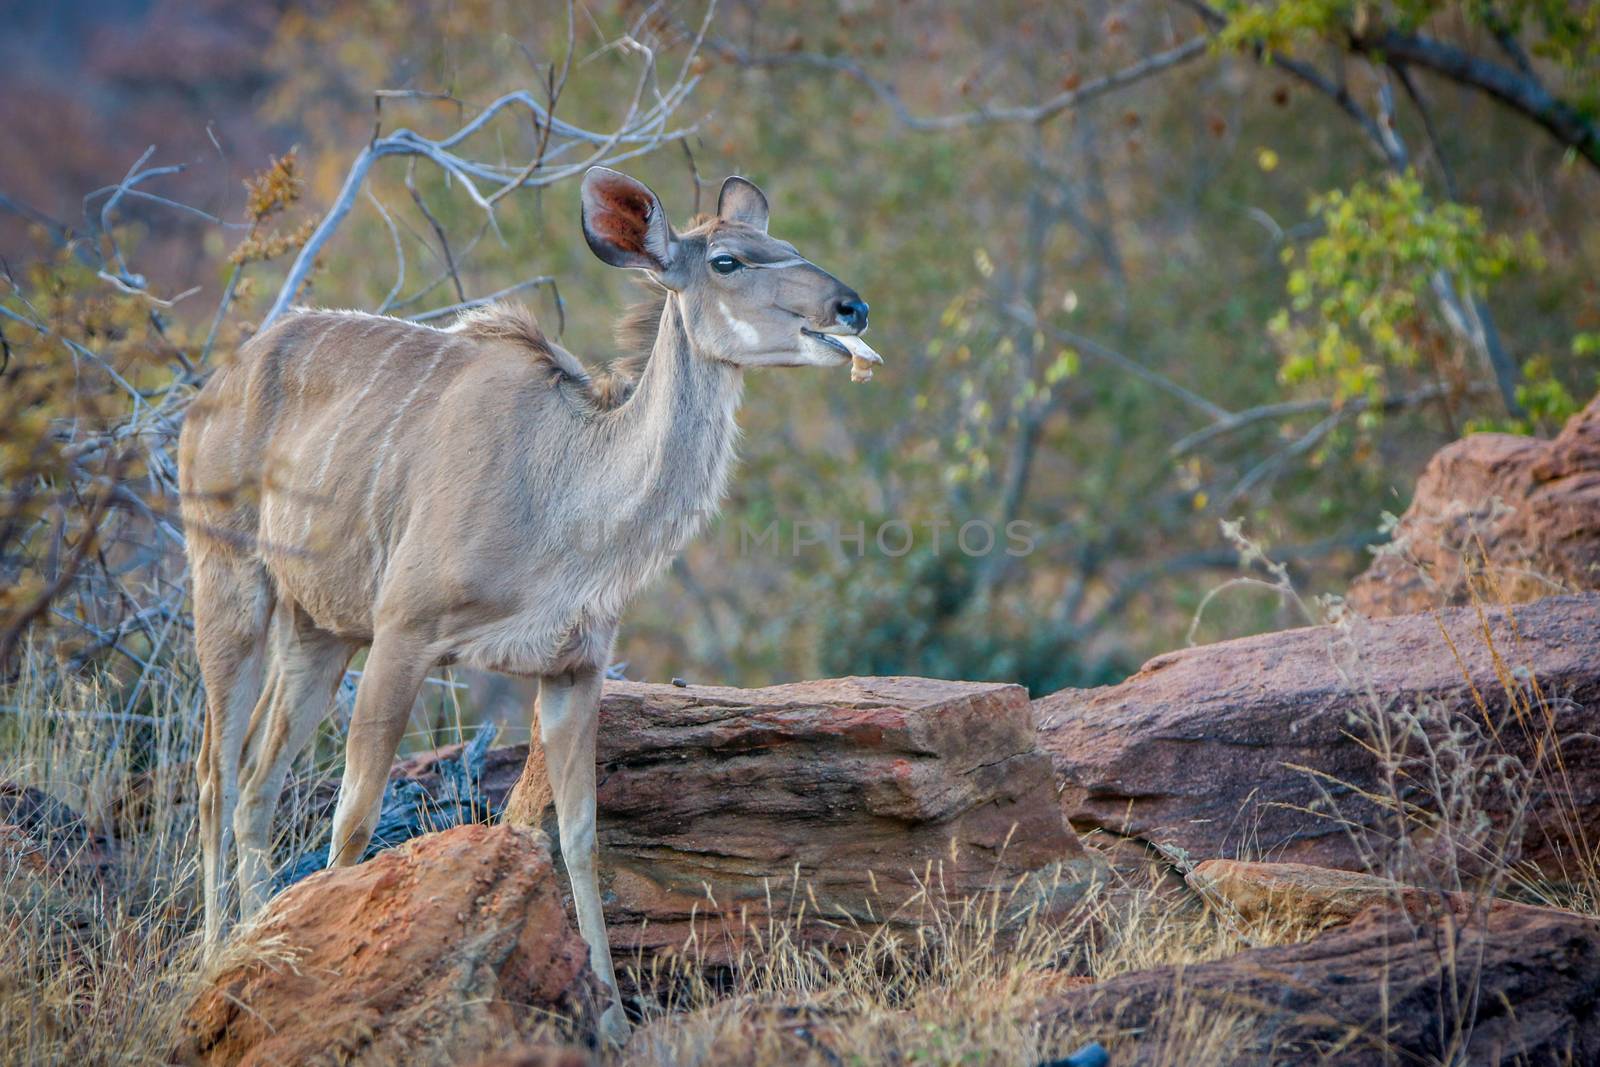 Female Kudu chewing on a bone in the Welgevonden game reserve, South Africa.